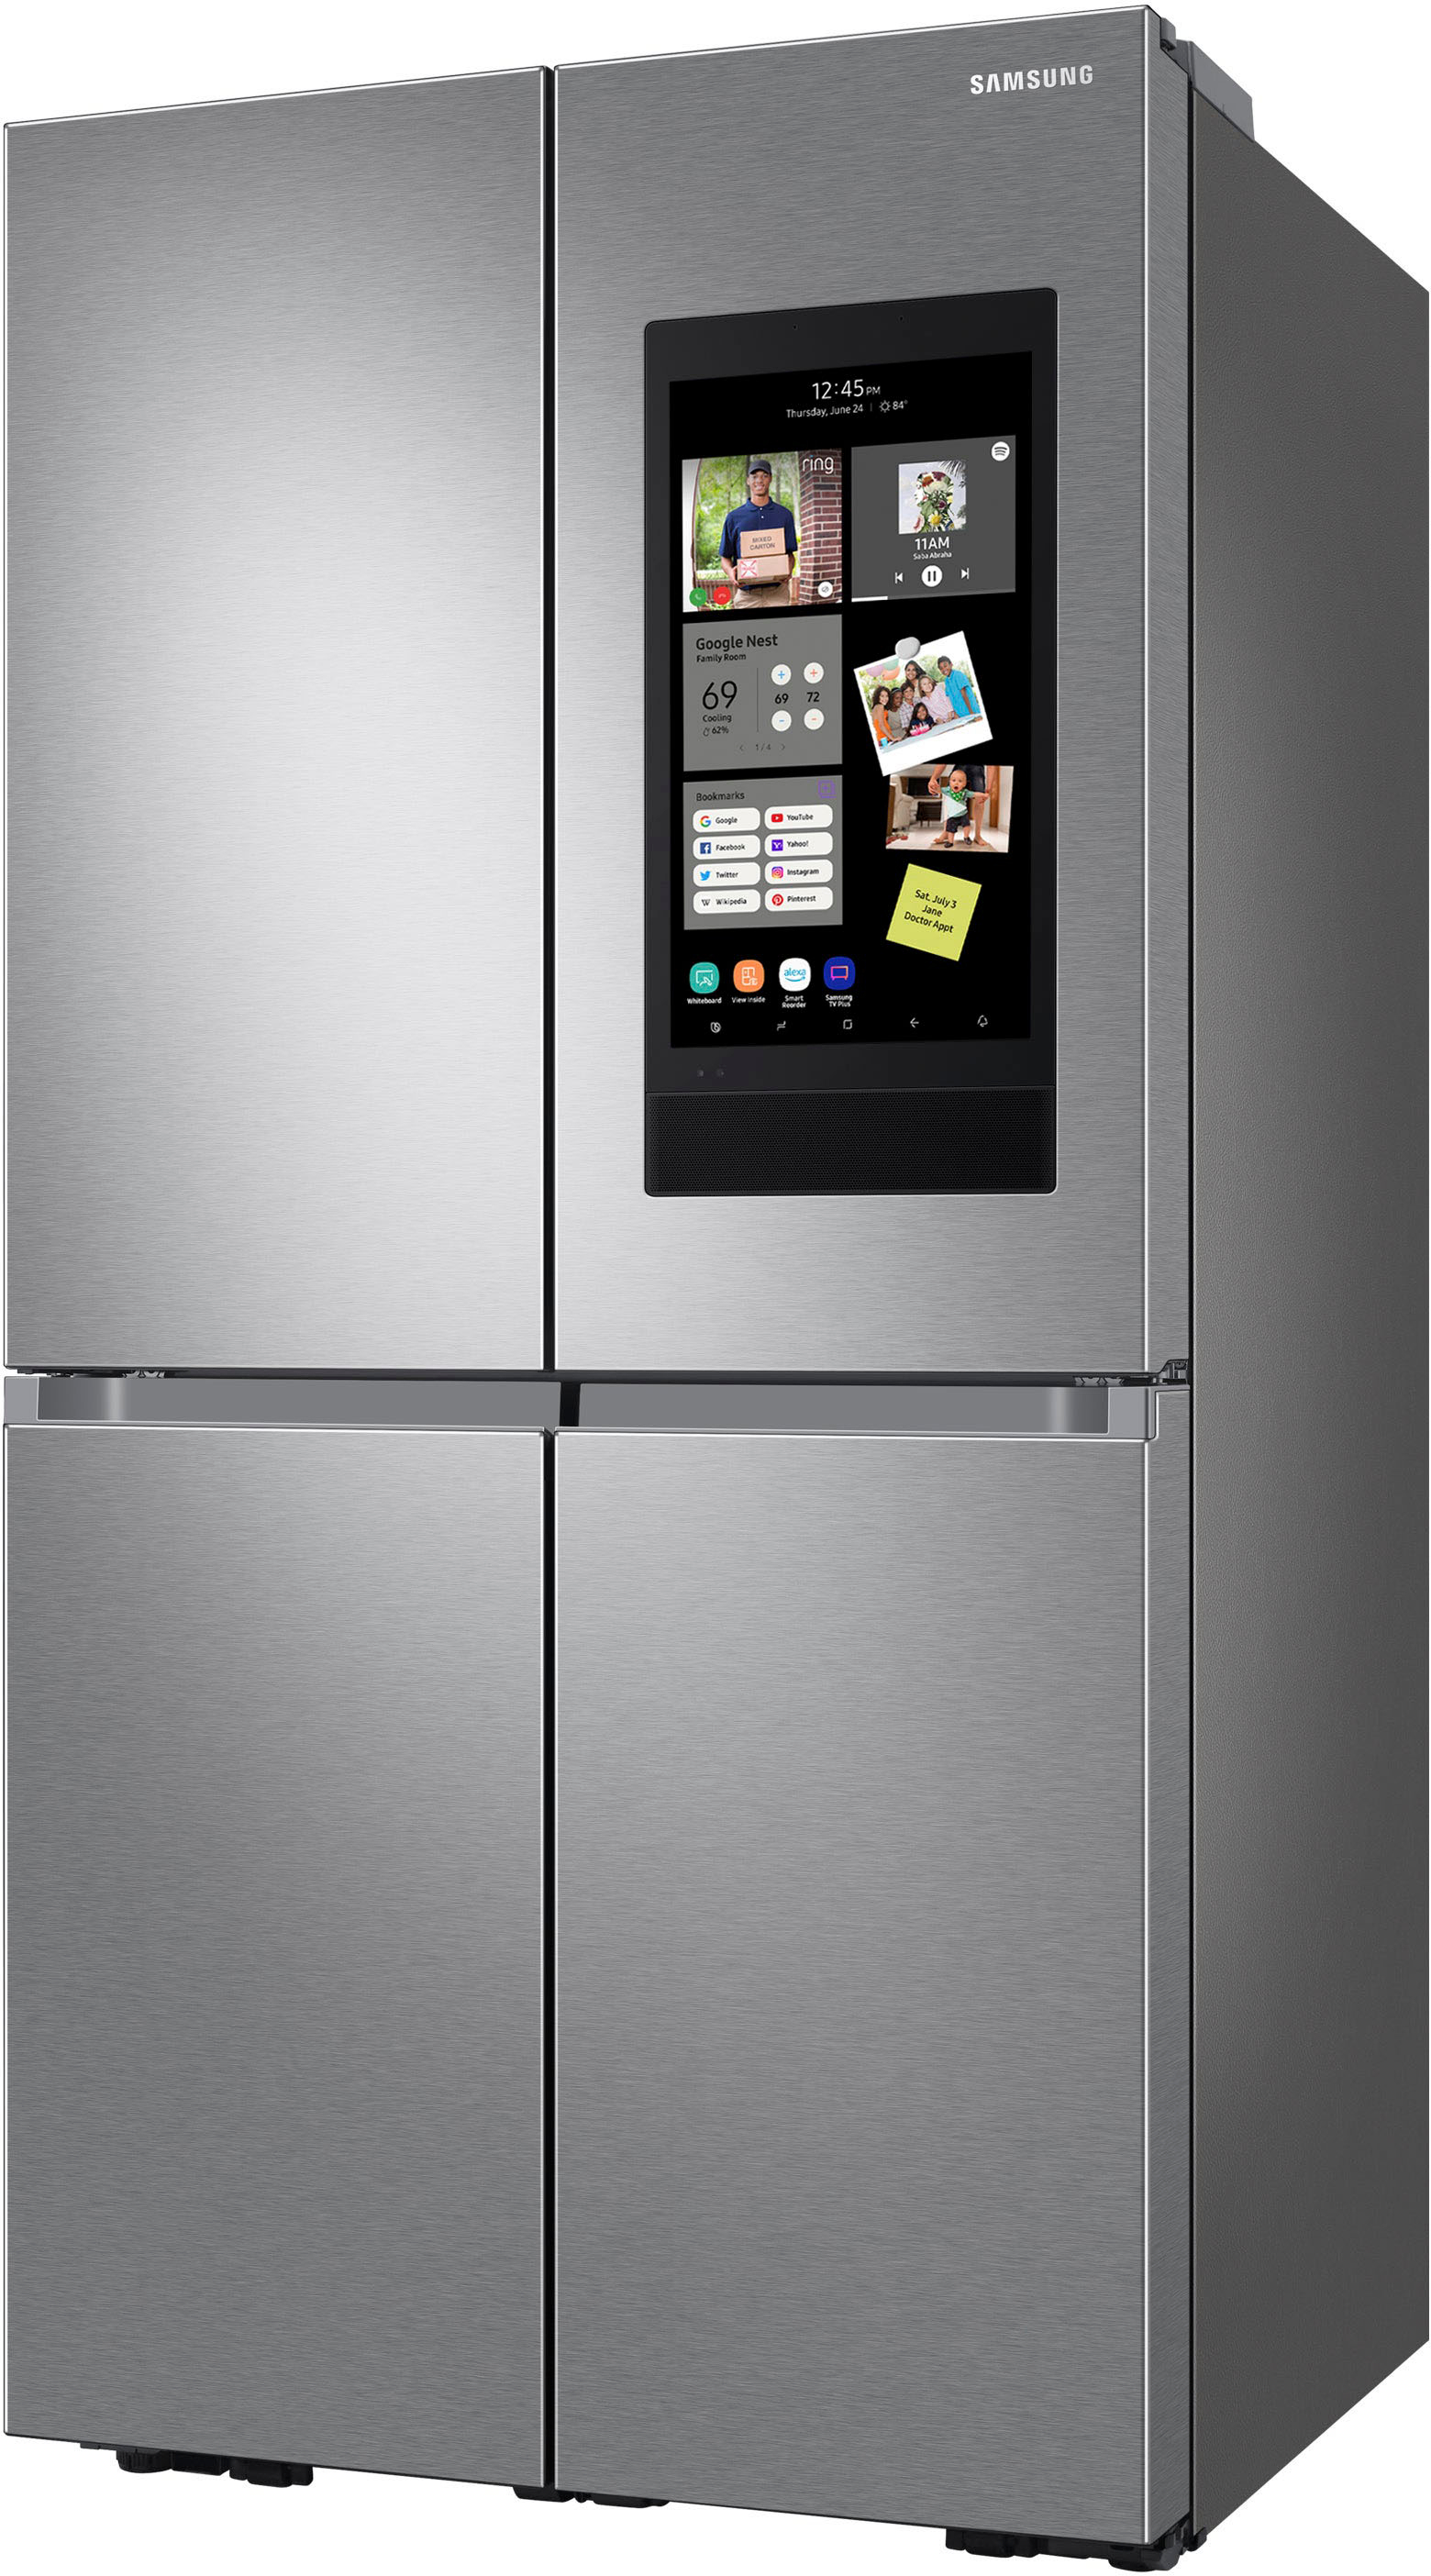 Samsung's Wi-Fi oven and touchscreen fridge join the CNET Smart Home - CNET